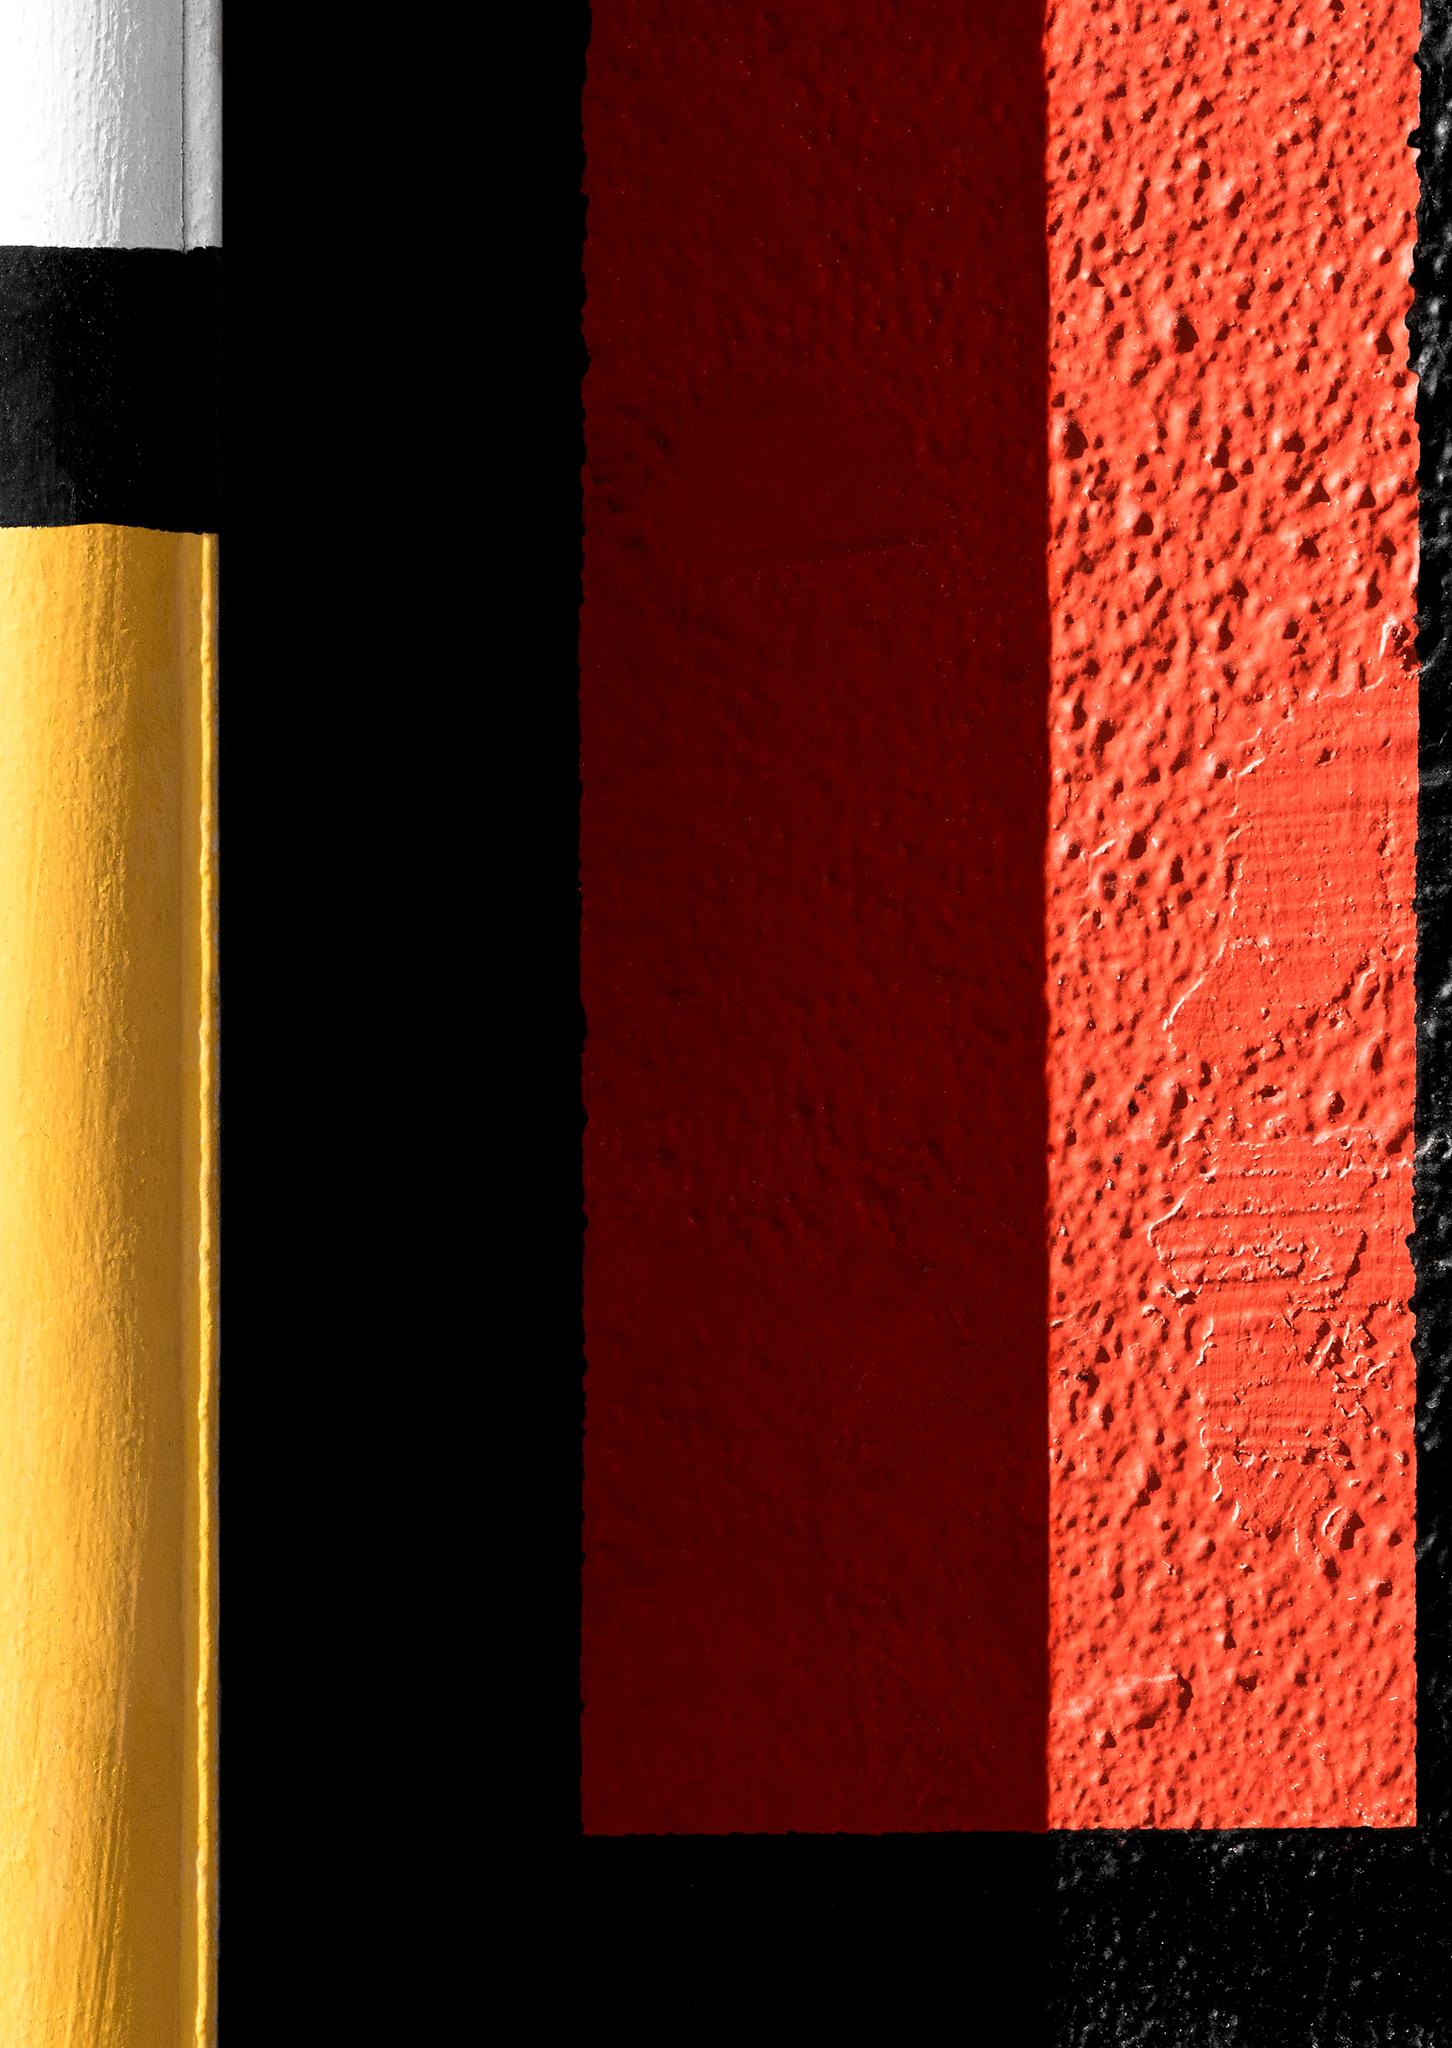 Philly Mondrian 2 - focuses on lines in urban landscape, red, yellow, black - Photograph by Jon Setter